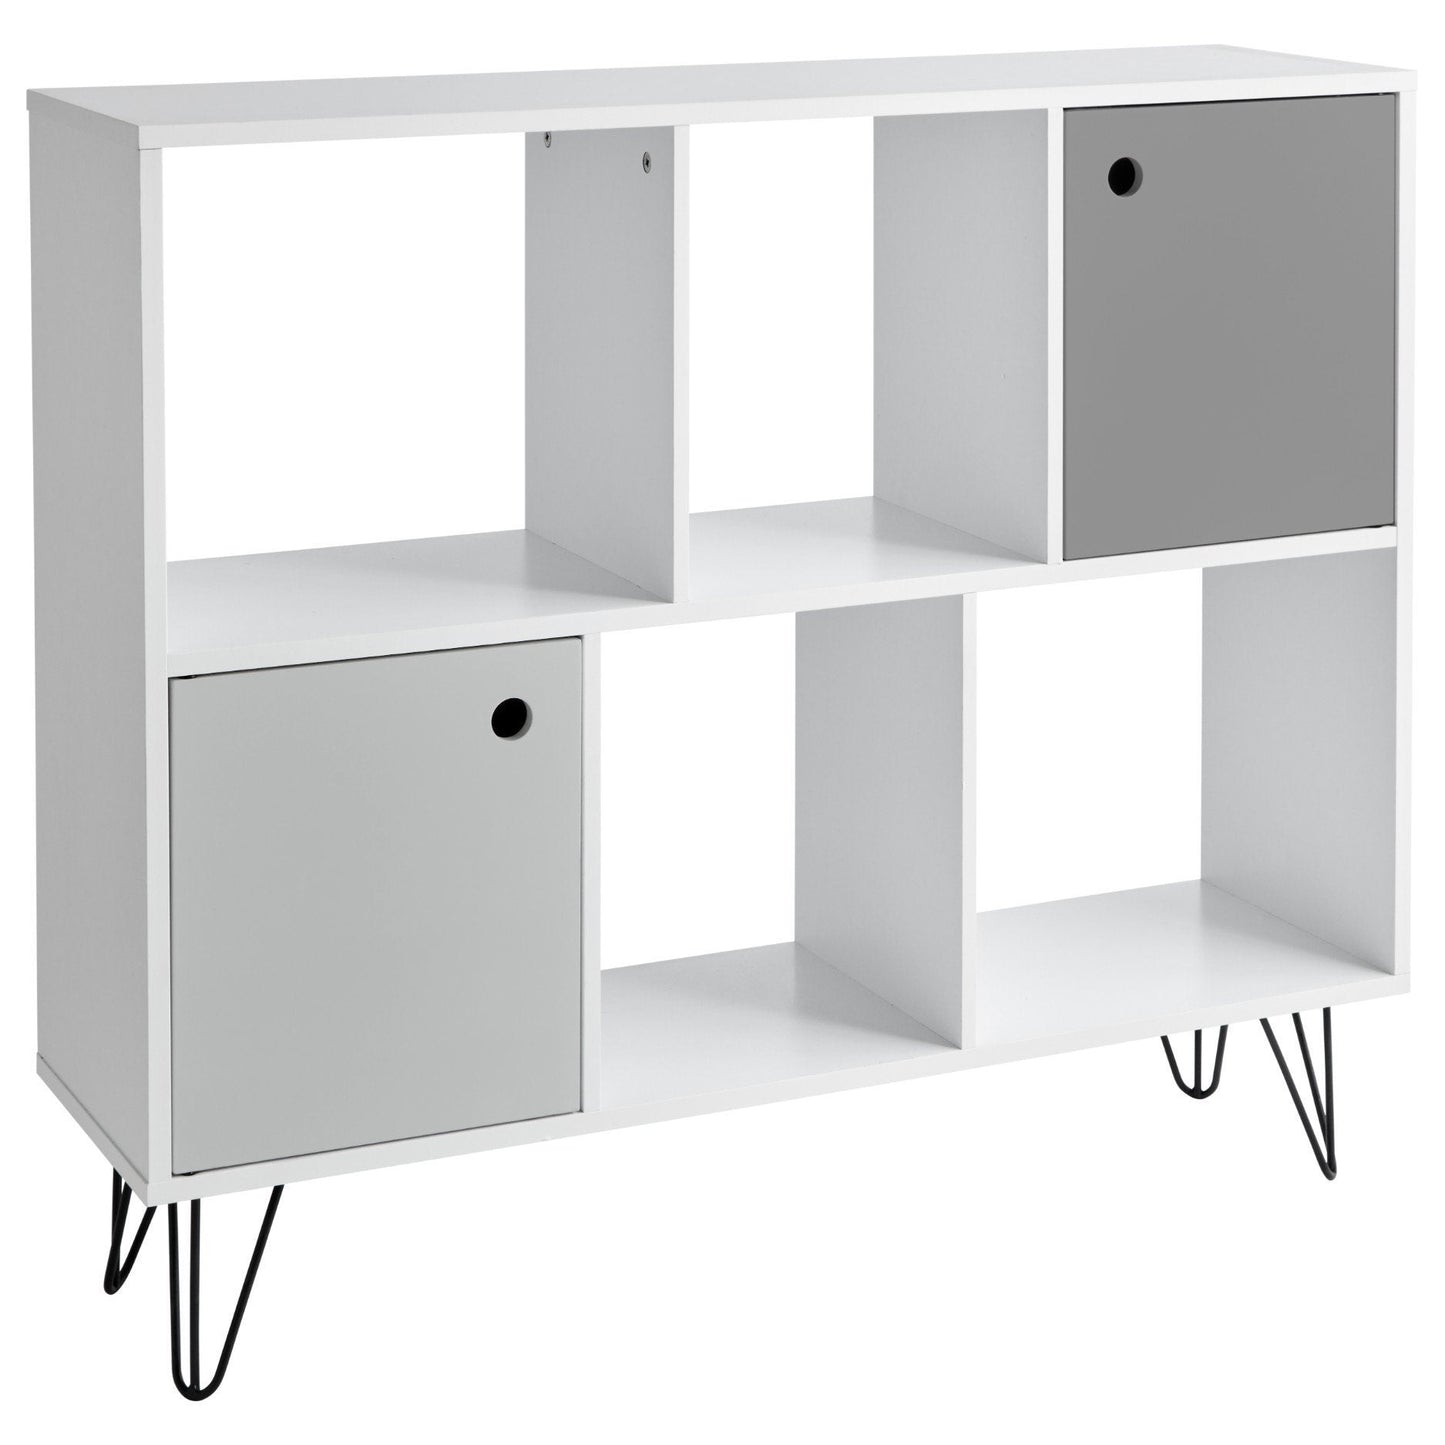 Anderson White Mid Century Modern storage unit with grey cupboards - Laura James